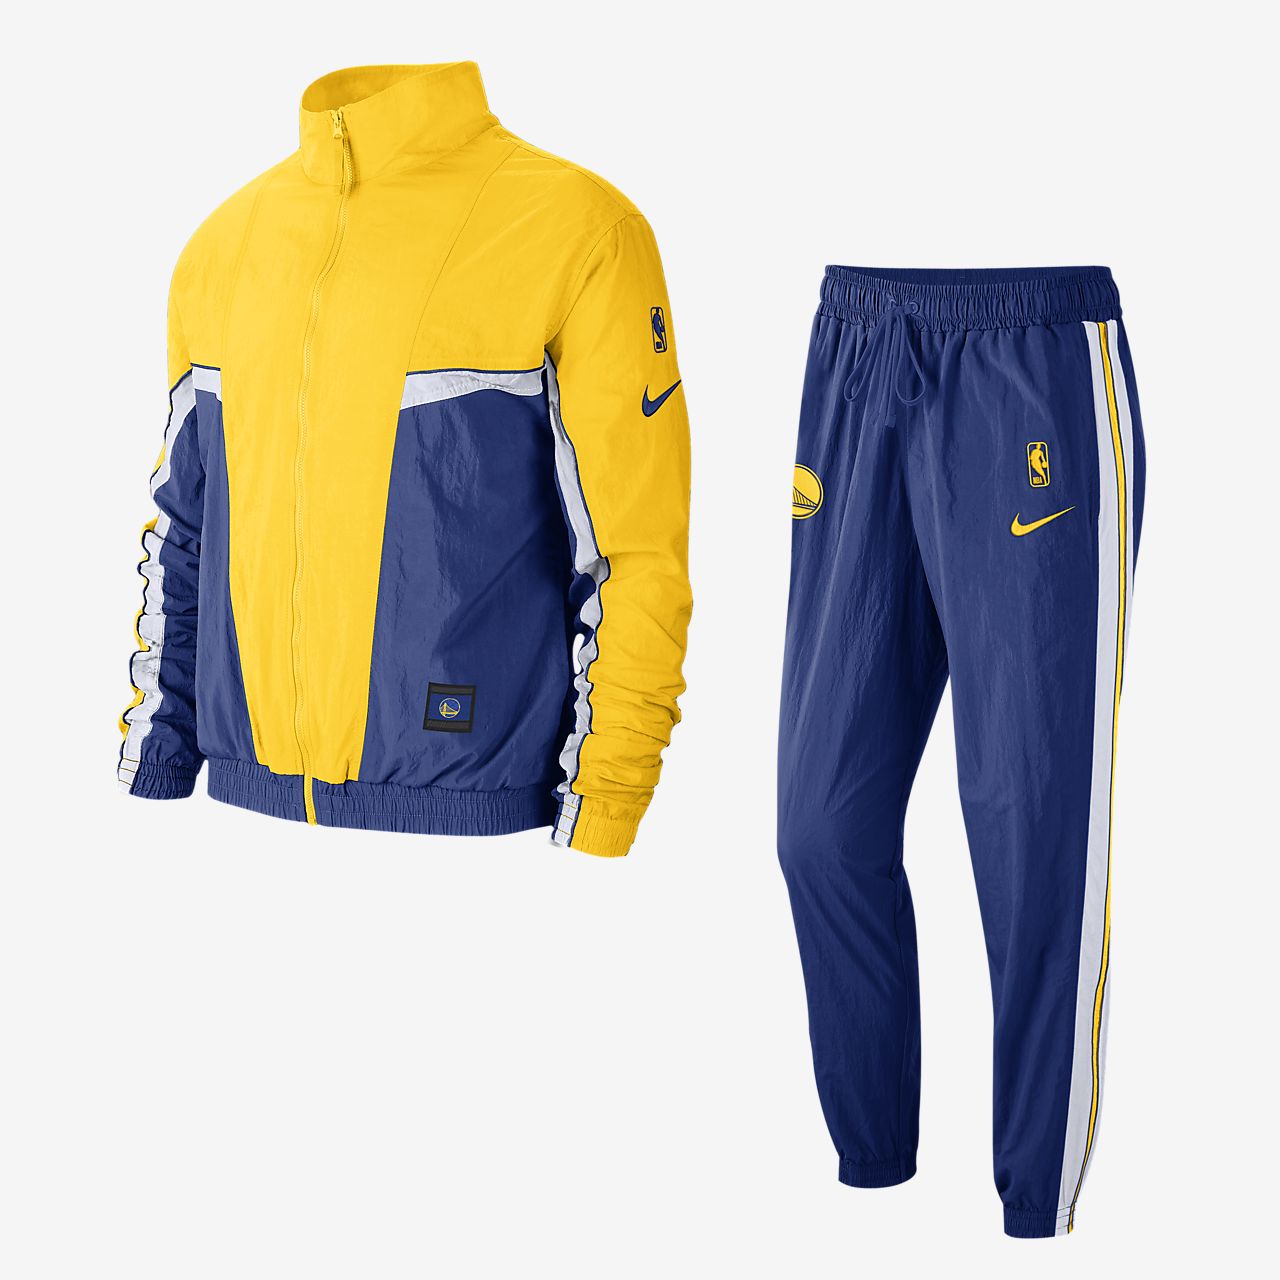 Buy > nba tracksuits > in stock